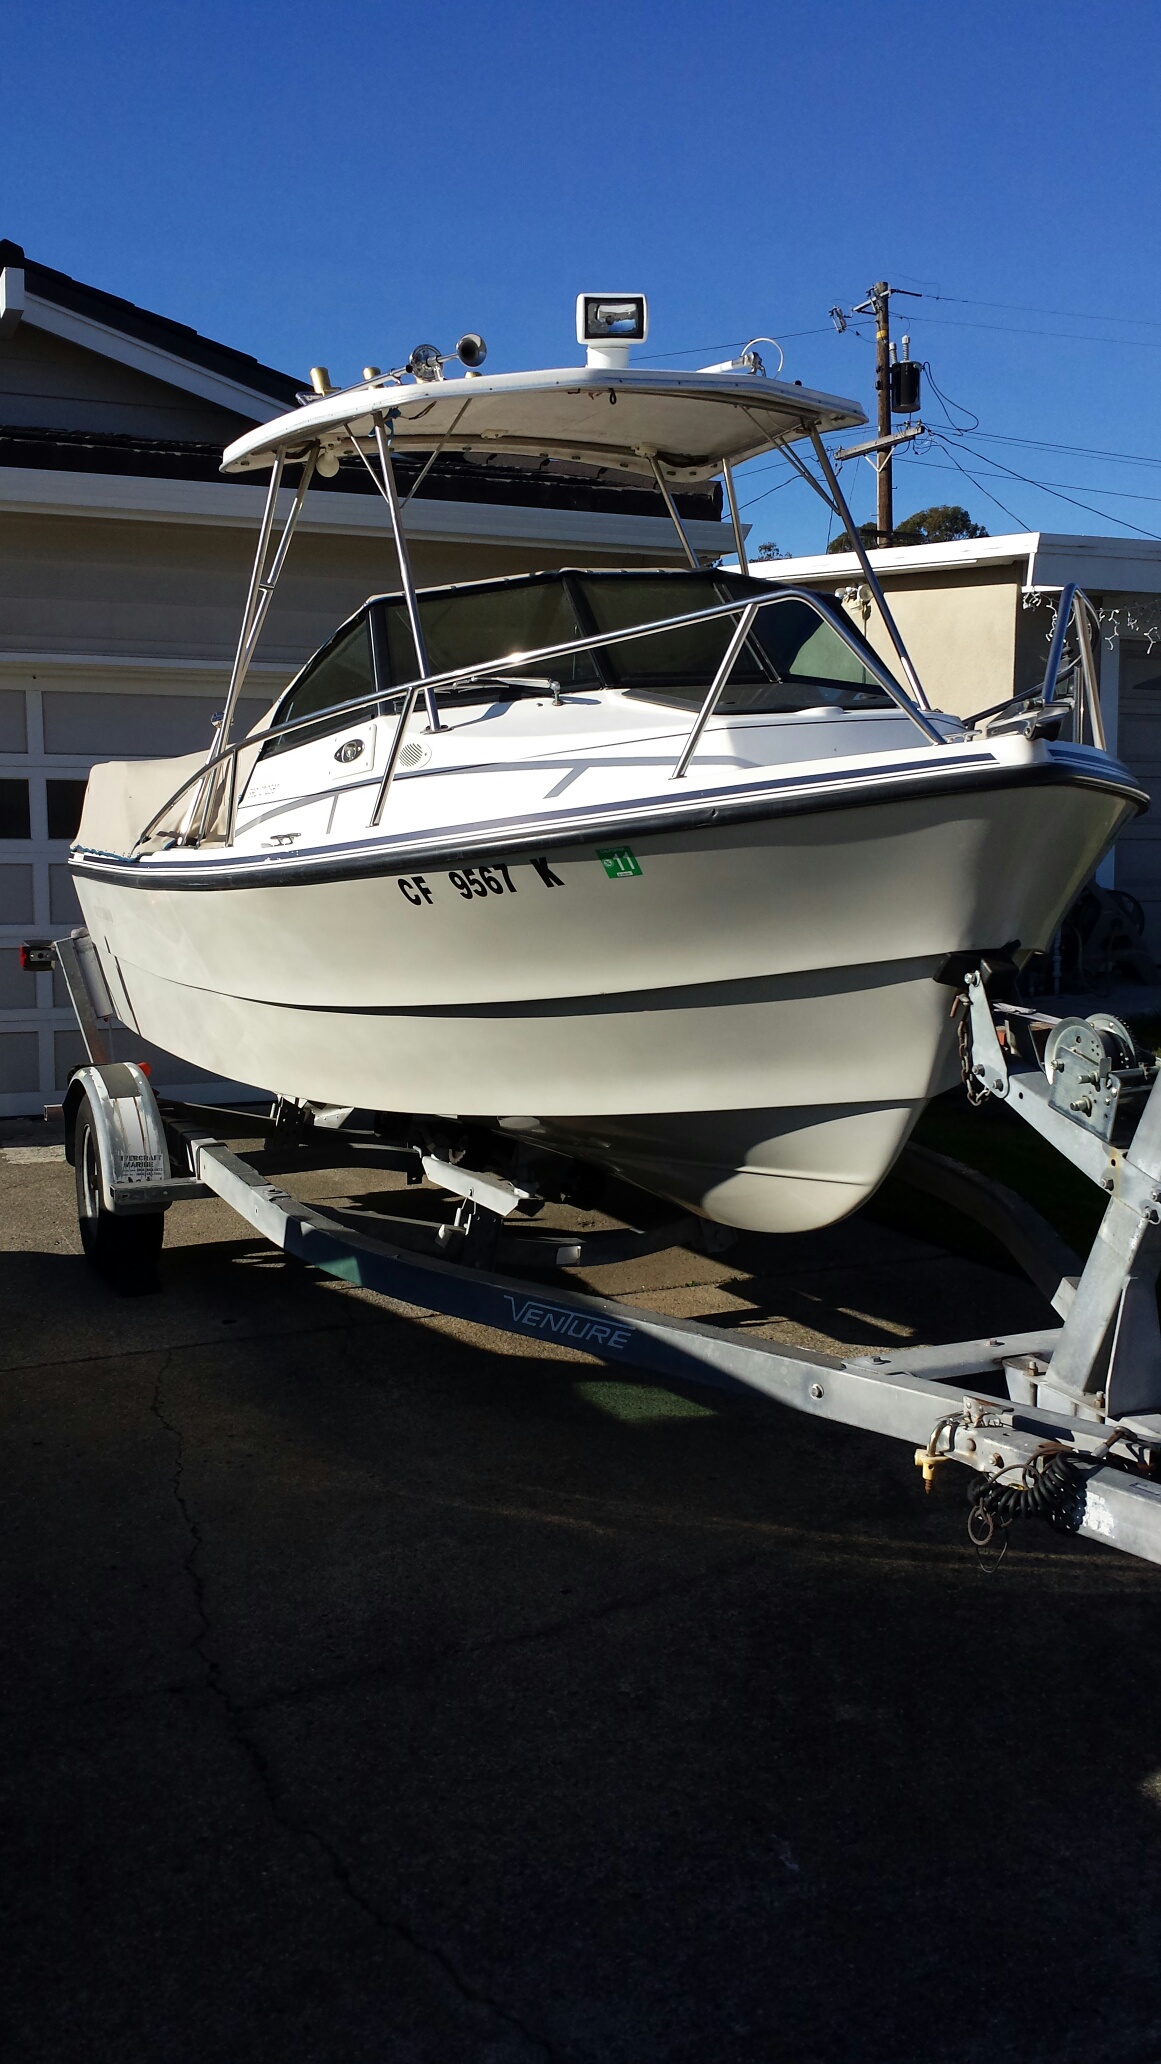 Andy's 17' Sea Chaser #2